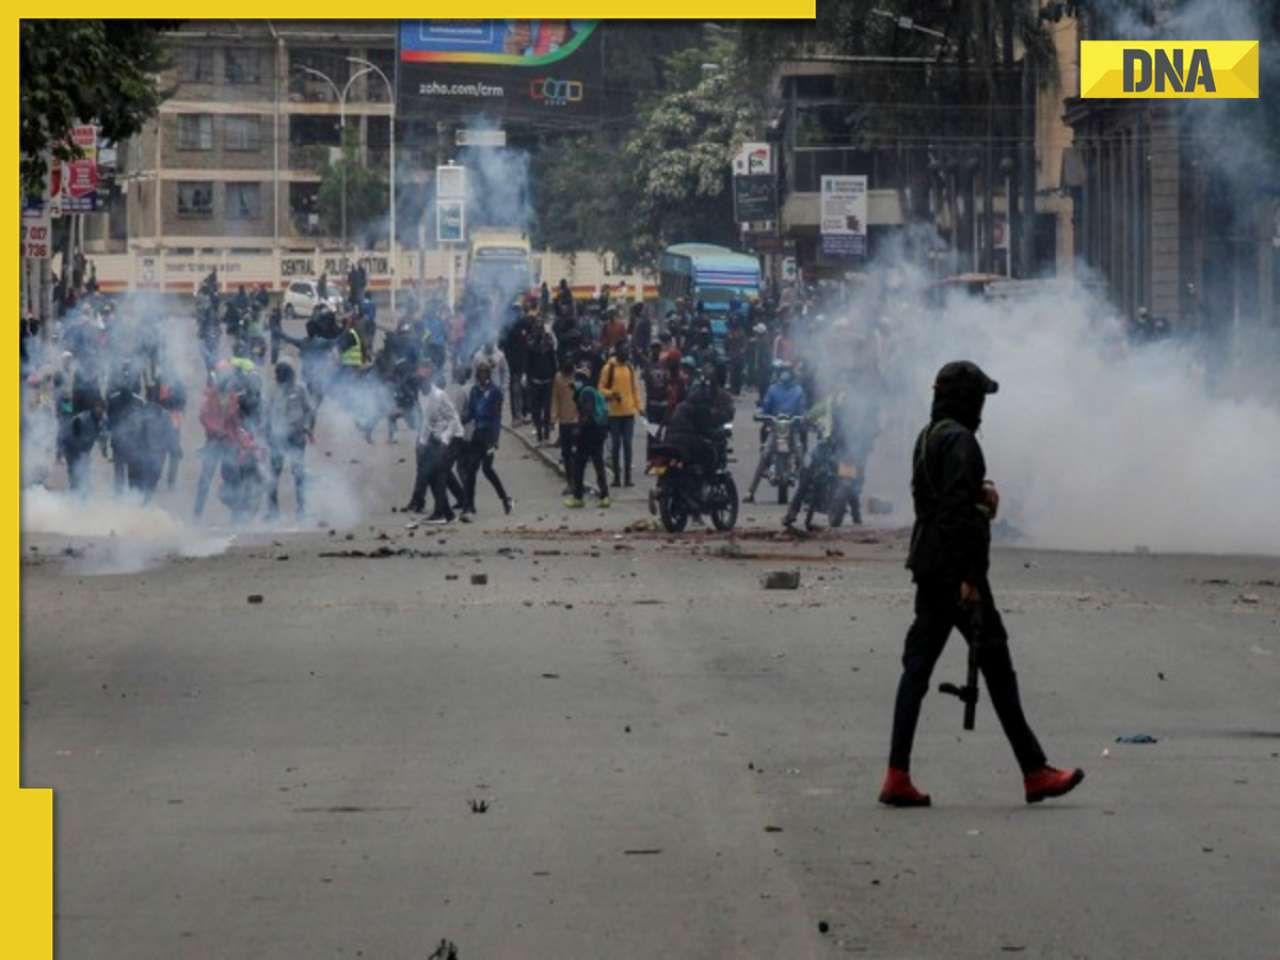 39 killed, over 360 injured in anti-tax protest in Kenya: Report